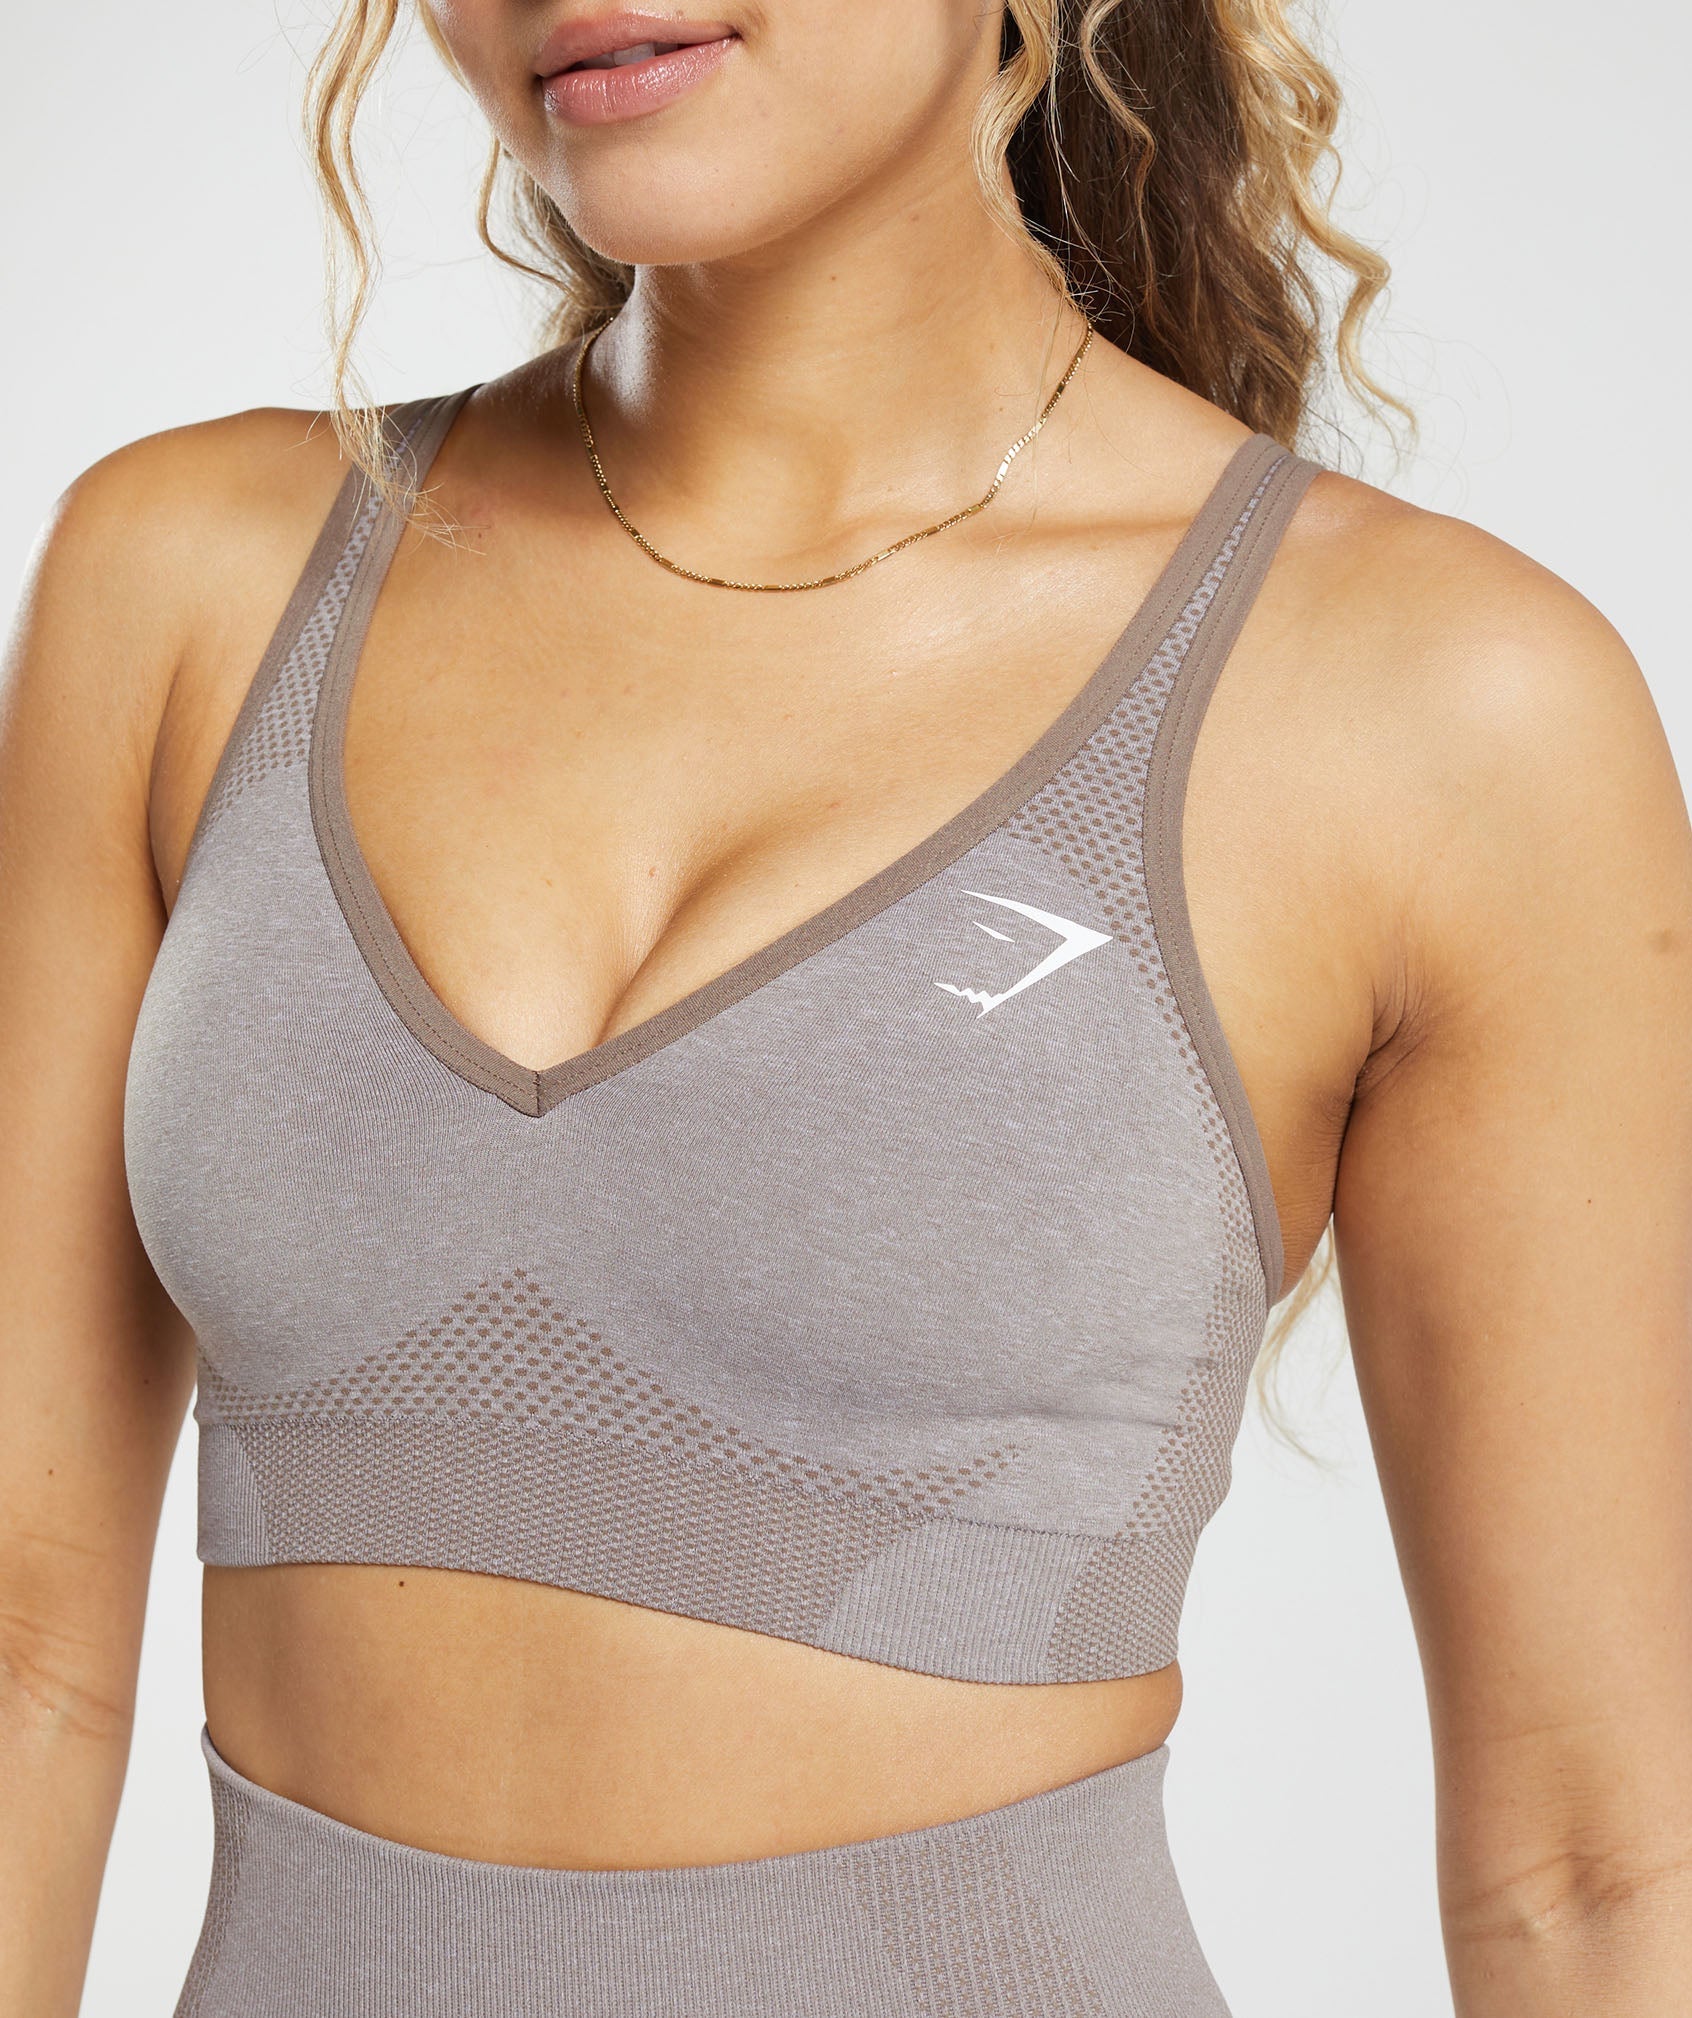 Gymshark Energy+ Seamless Sports Bra in Rose Taupe Size M - $40 New With  Tags - From May